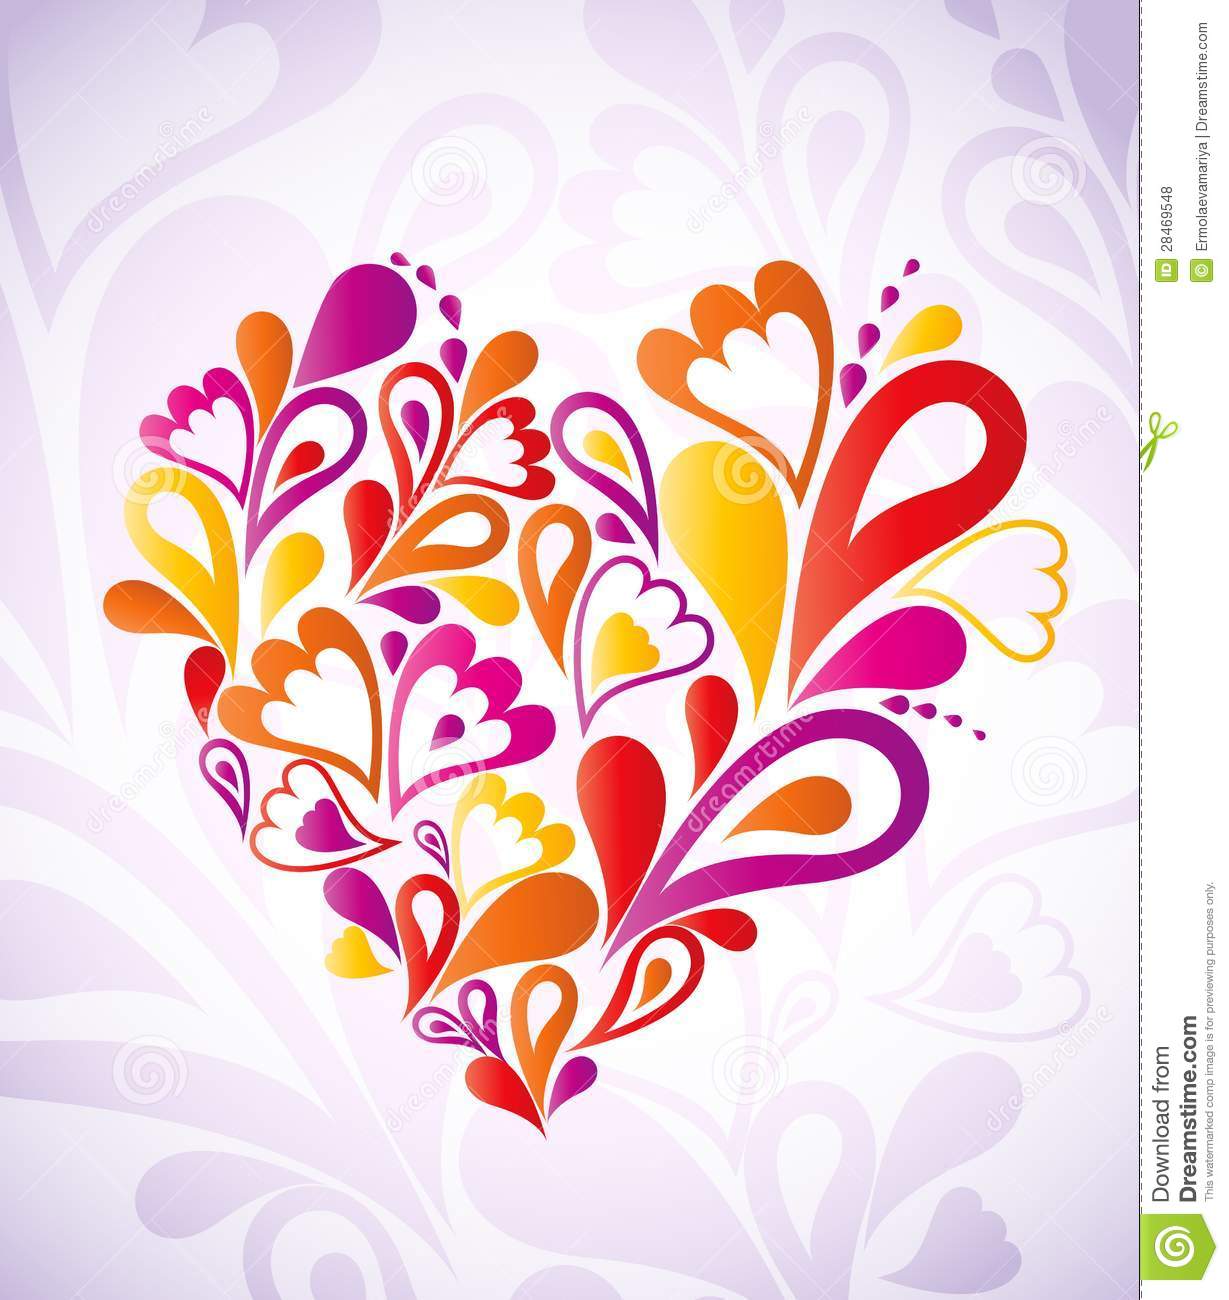 Colorful Abstract Heart Vector Art